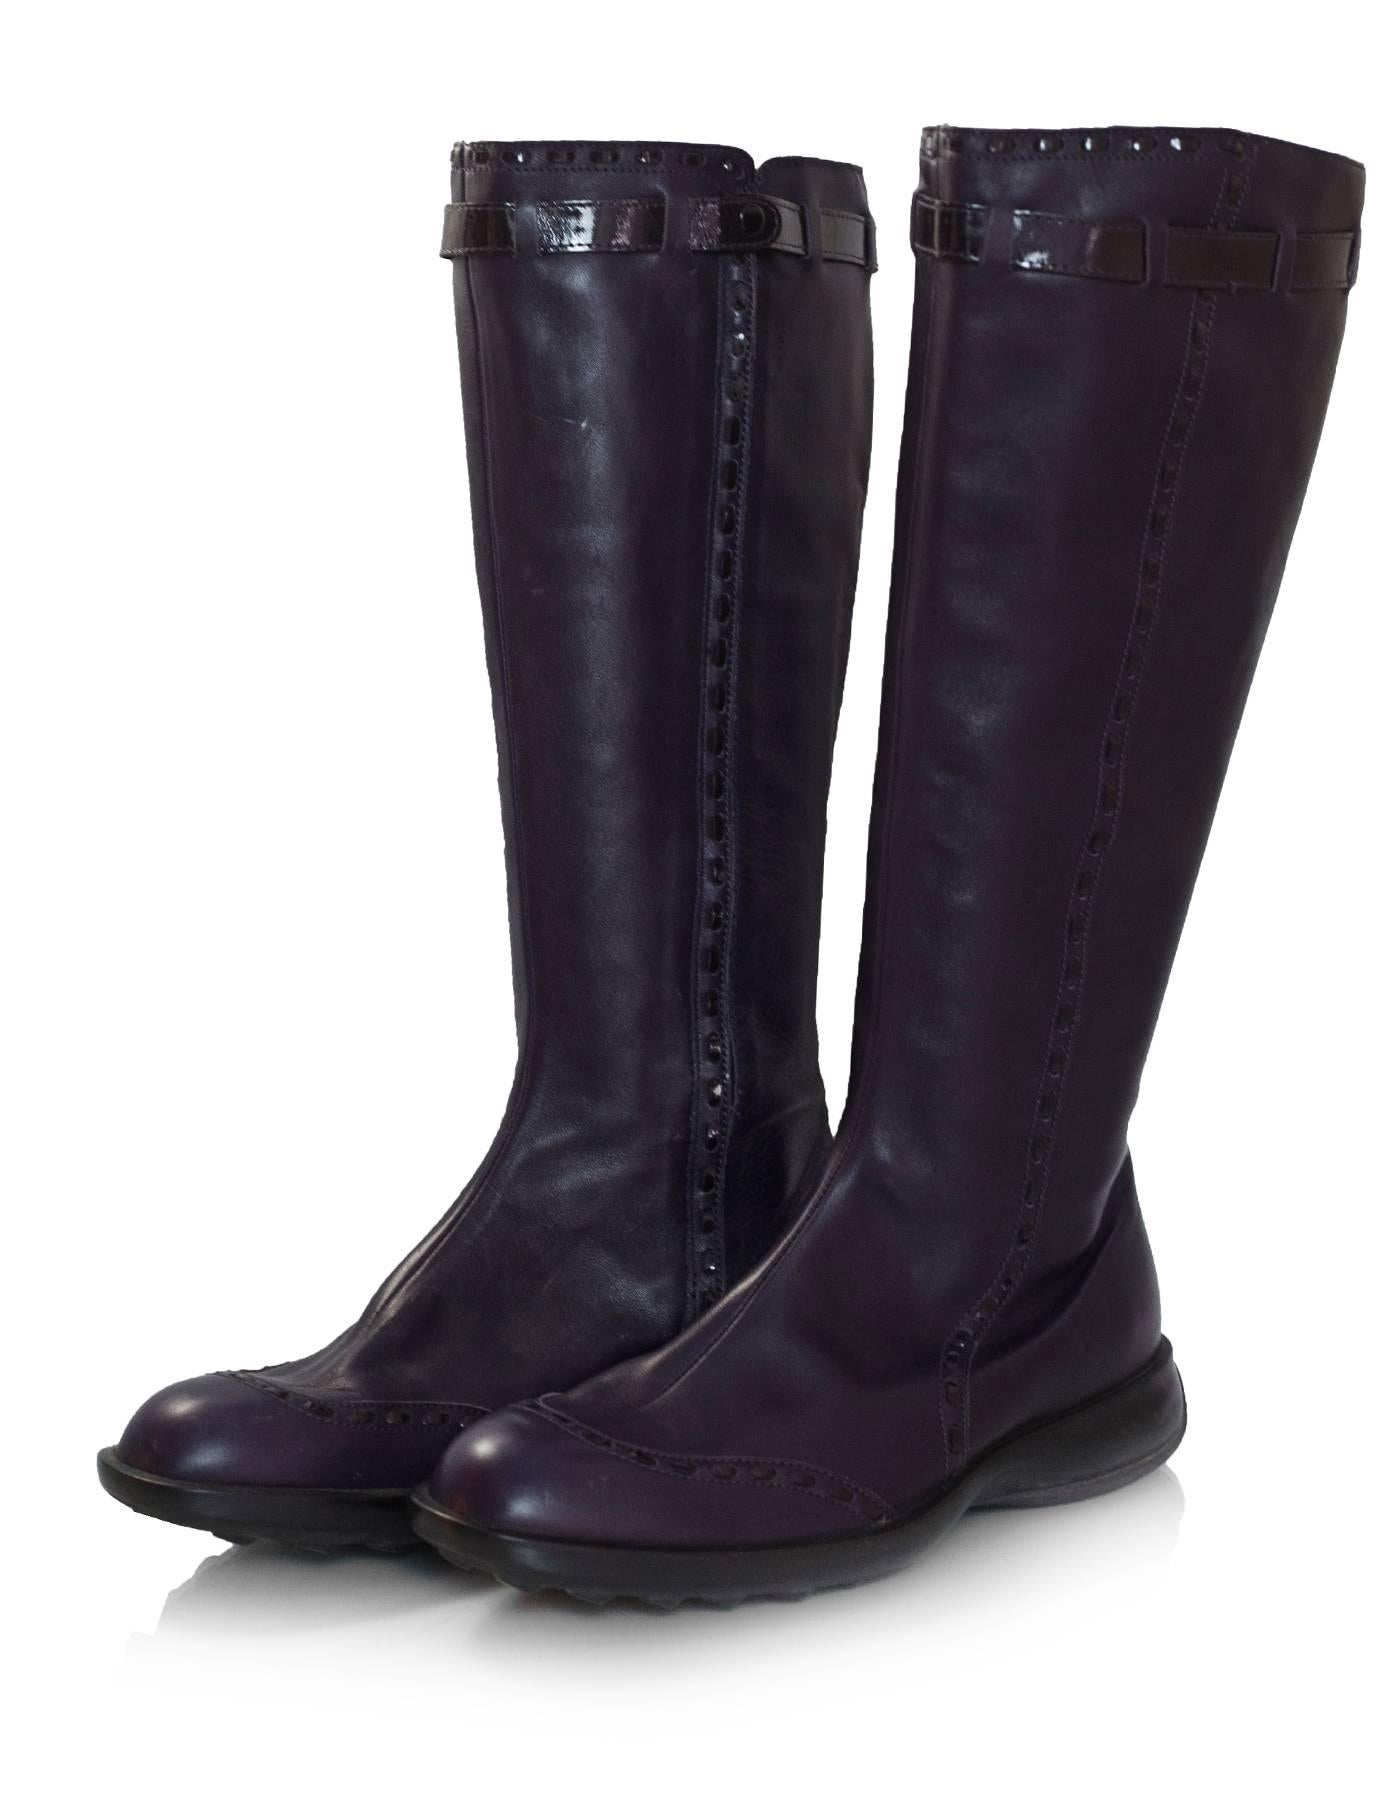 TOD's Purple Leather Boots Sz 38.5

Made In: Italy
Color: Purple
Materials: Leather
Closure/Opening: Side zip closure with snap button
Sole Stamp: TODS
Overall Condition: Very good pre-owned condition with the exception of creasing and marks at